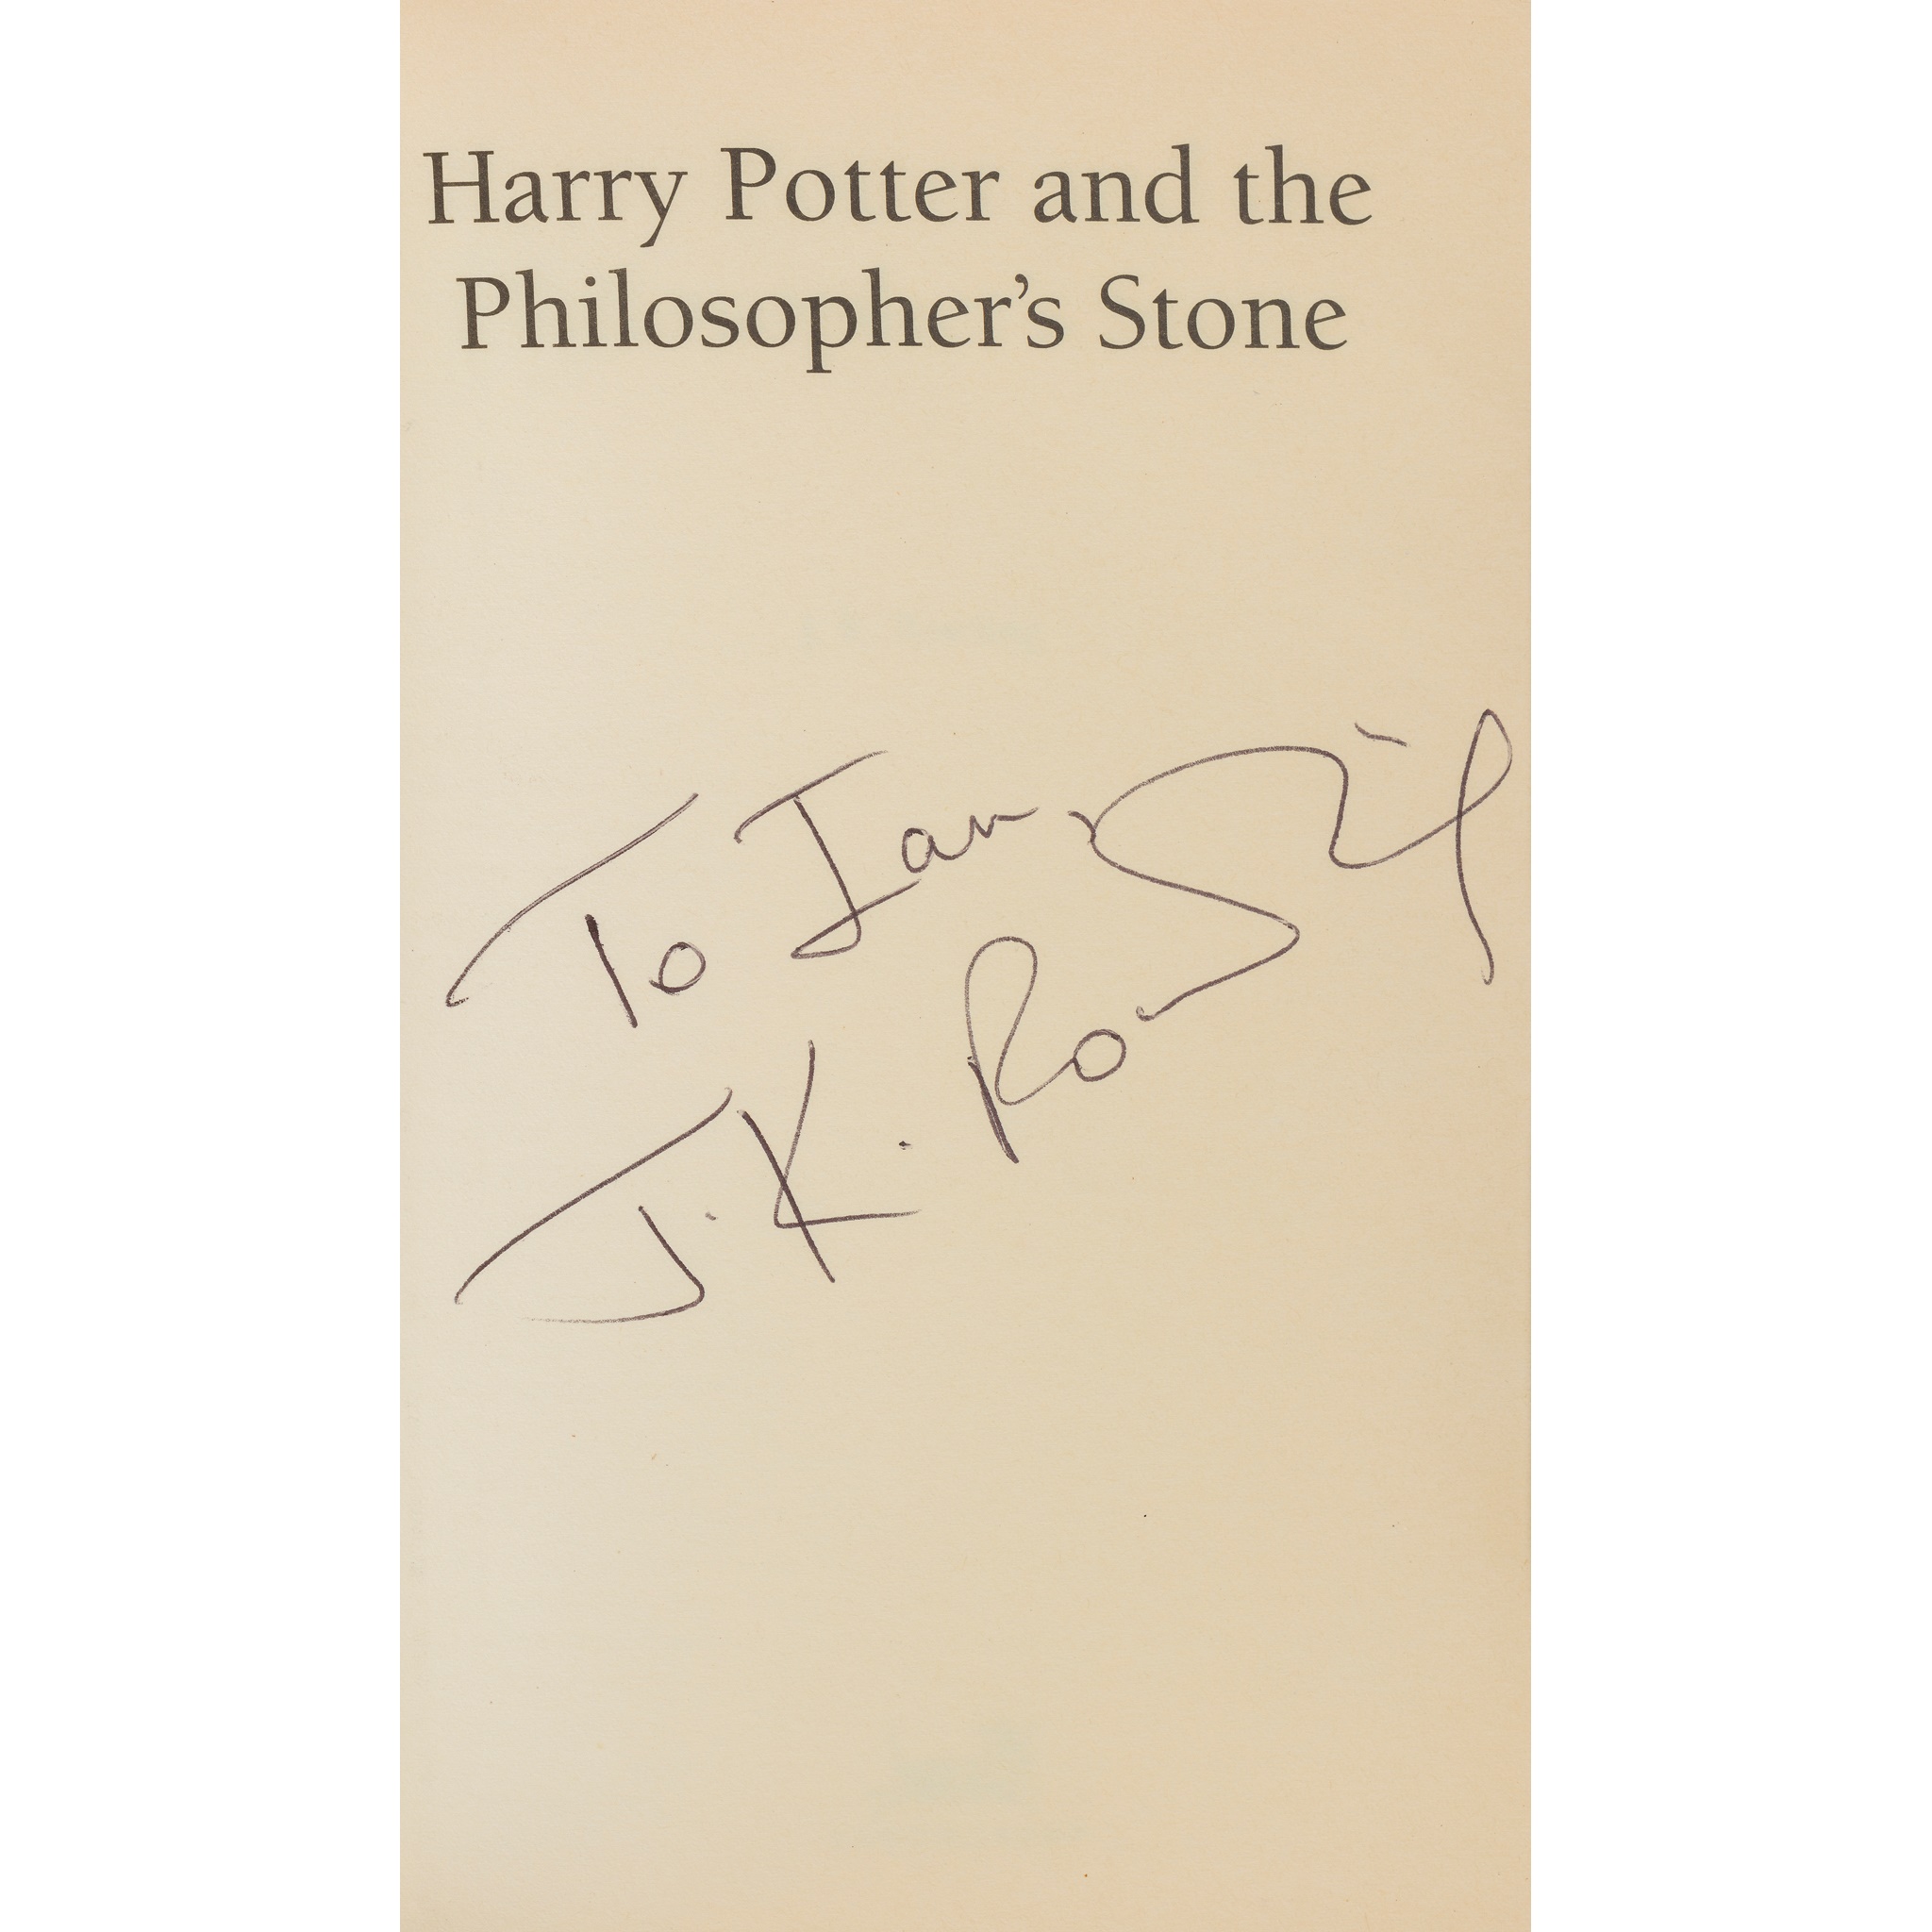 Rowling, J.K. Harry Potter and the Philosopher's Stone - Image 2 of 2